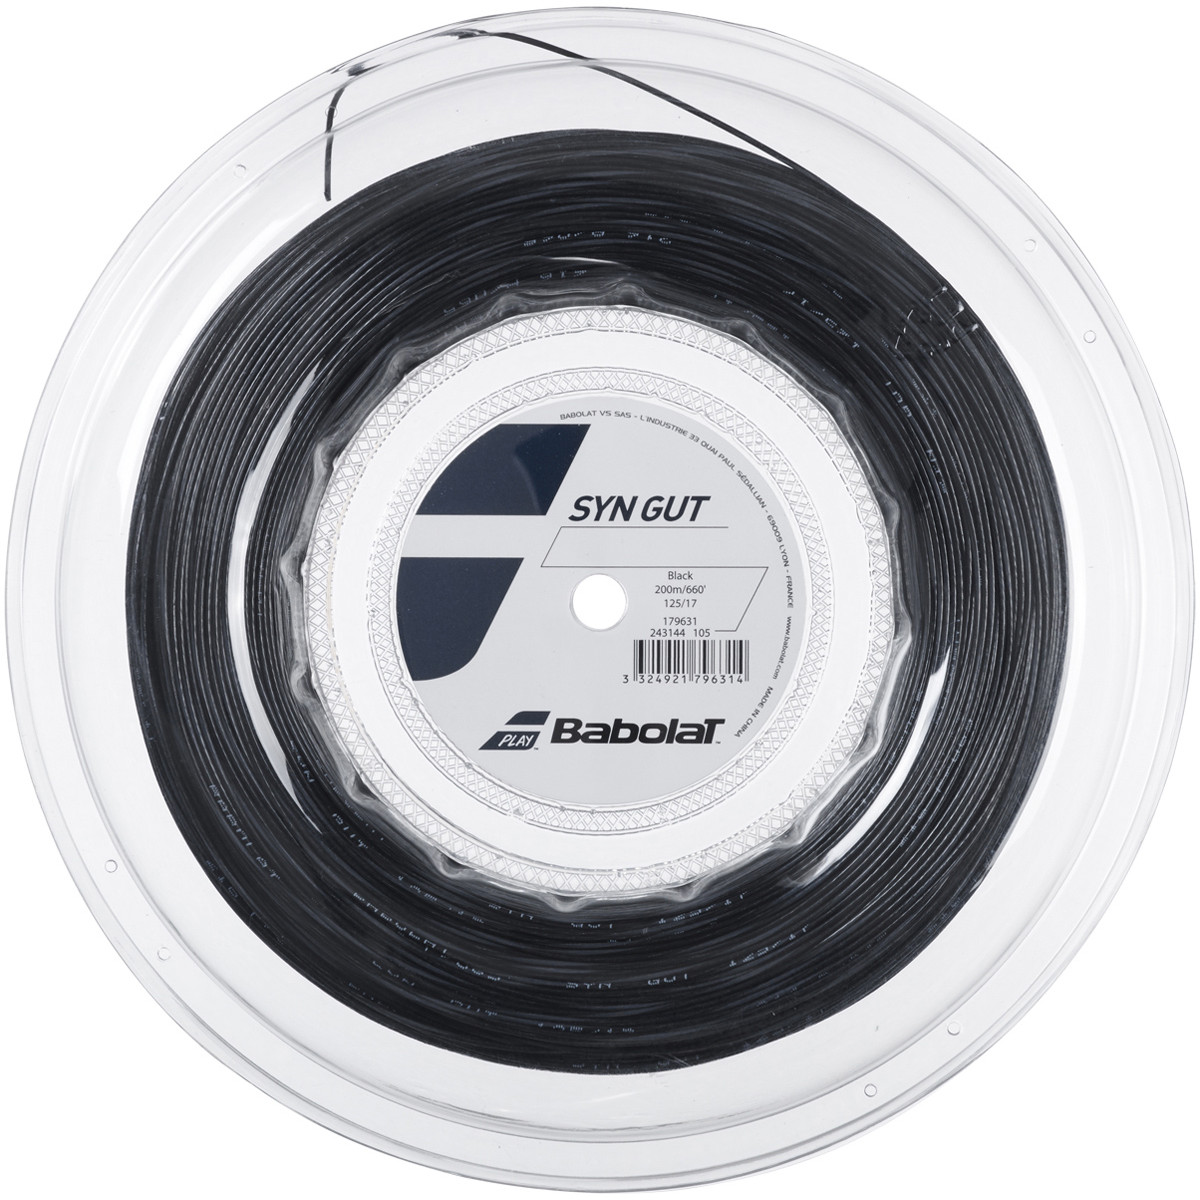 Babolat Synthetic Gut Tennis String 200m Reels Any Gauge Free UK P&P 